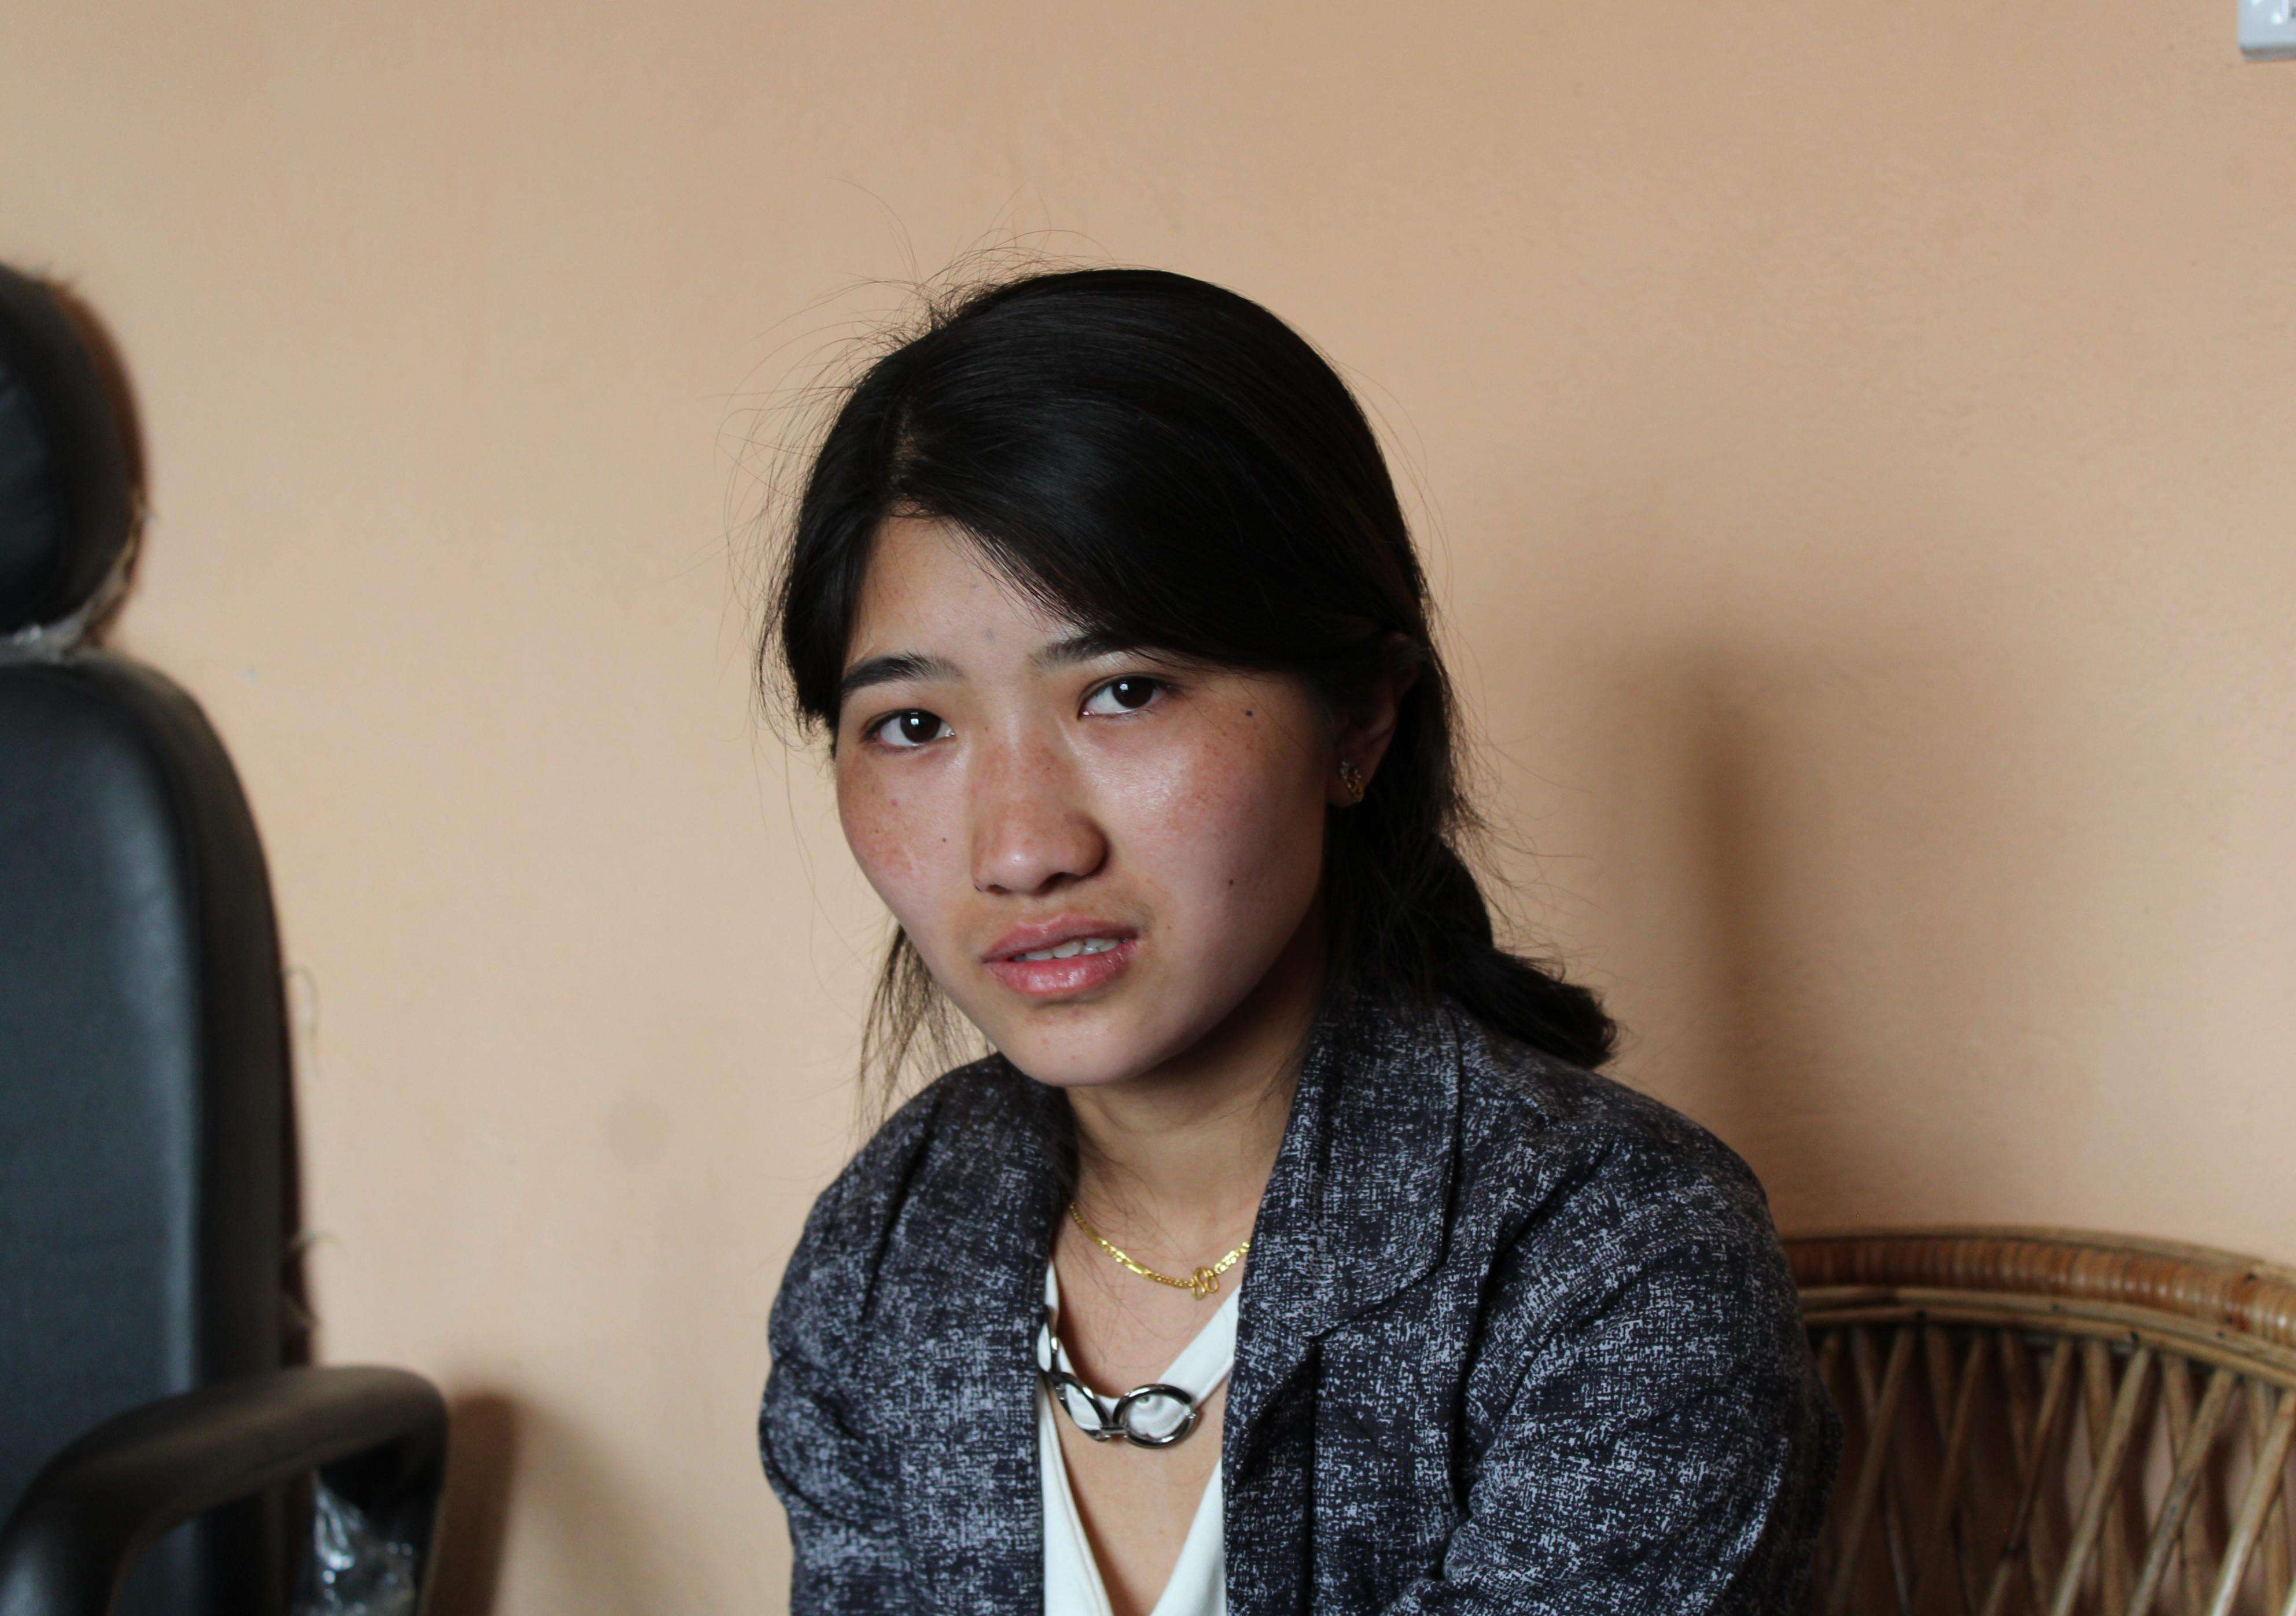 Kabita Tamang, 23, was convinced after the quakes by a distant relative to fly to Kurdistan, which she mistakenly believed was a prosperous European nation. Photo: Kyodo